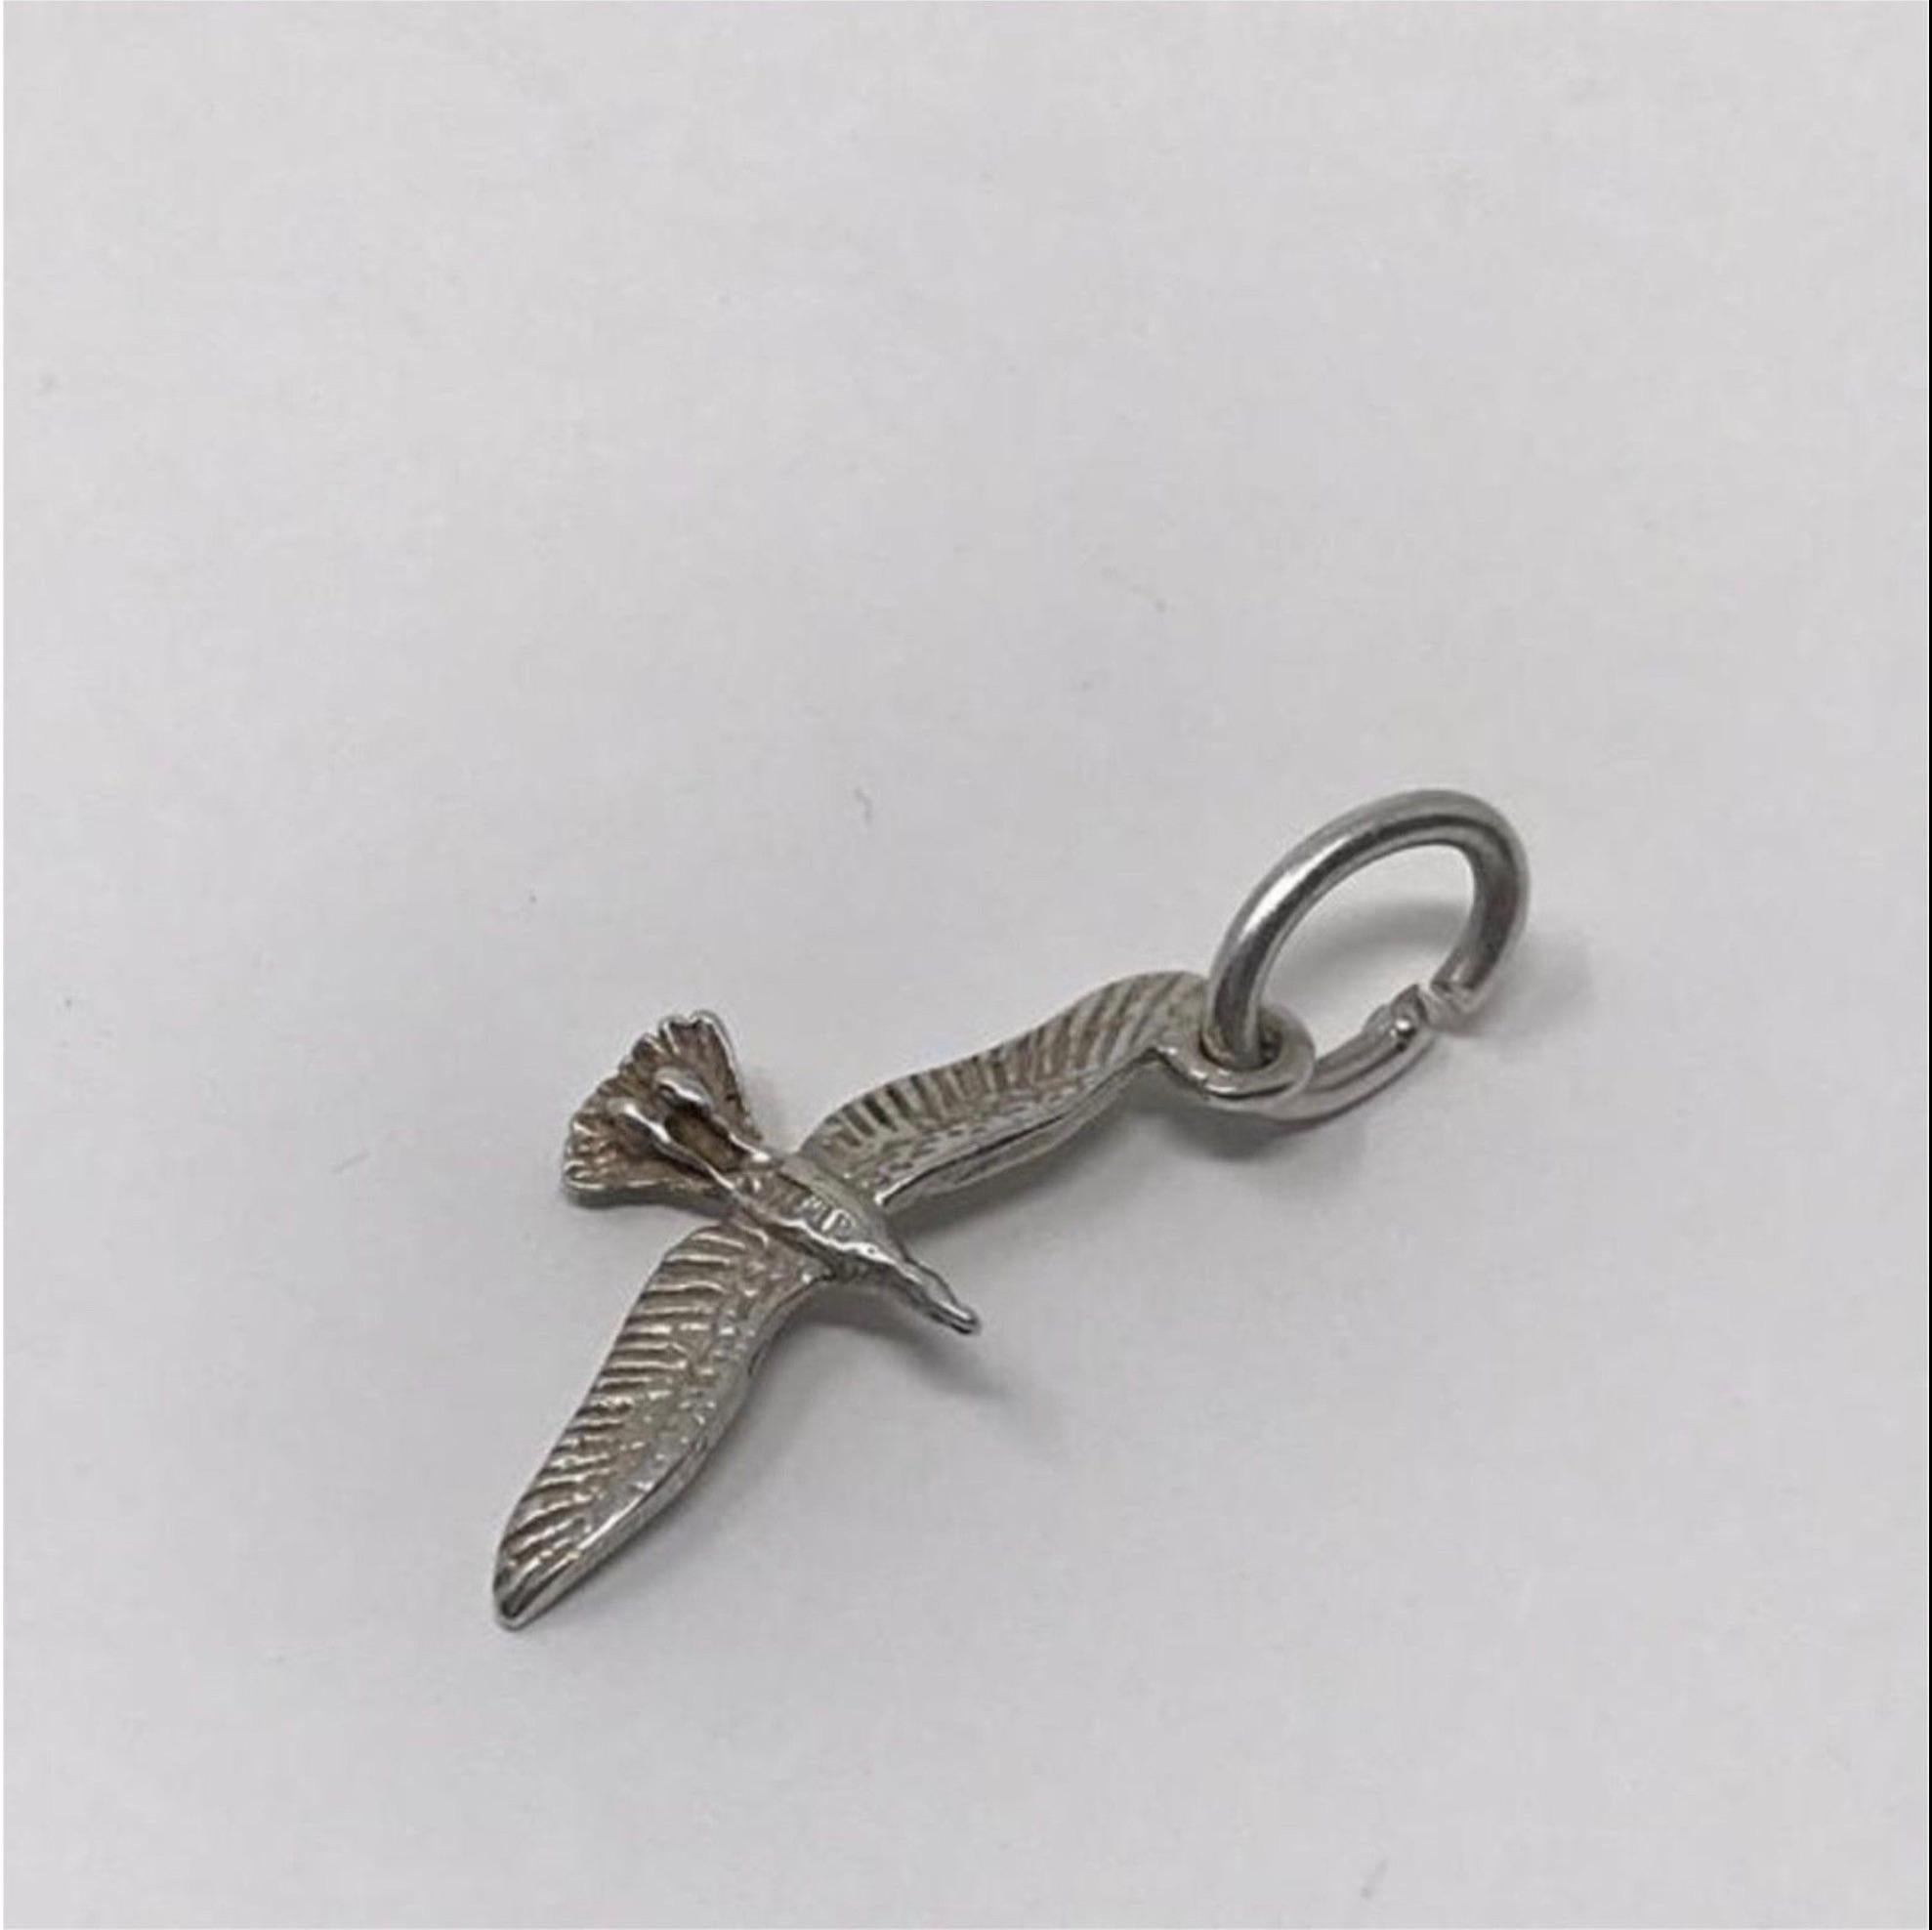 Model - Vintage Flying Bird/Goose Charm/Pendant

Condition - Exceptional

SKU - 1044-13

Original Retail - $25.00

Dimensions - 1 x .5 x .1

Closure Type - Not Applicable

Material - Sterling Silver

Comes with - No Additional